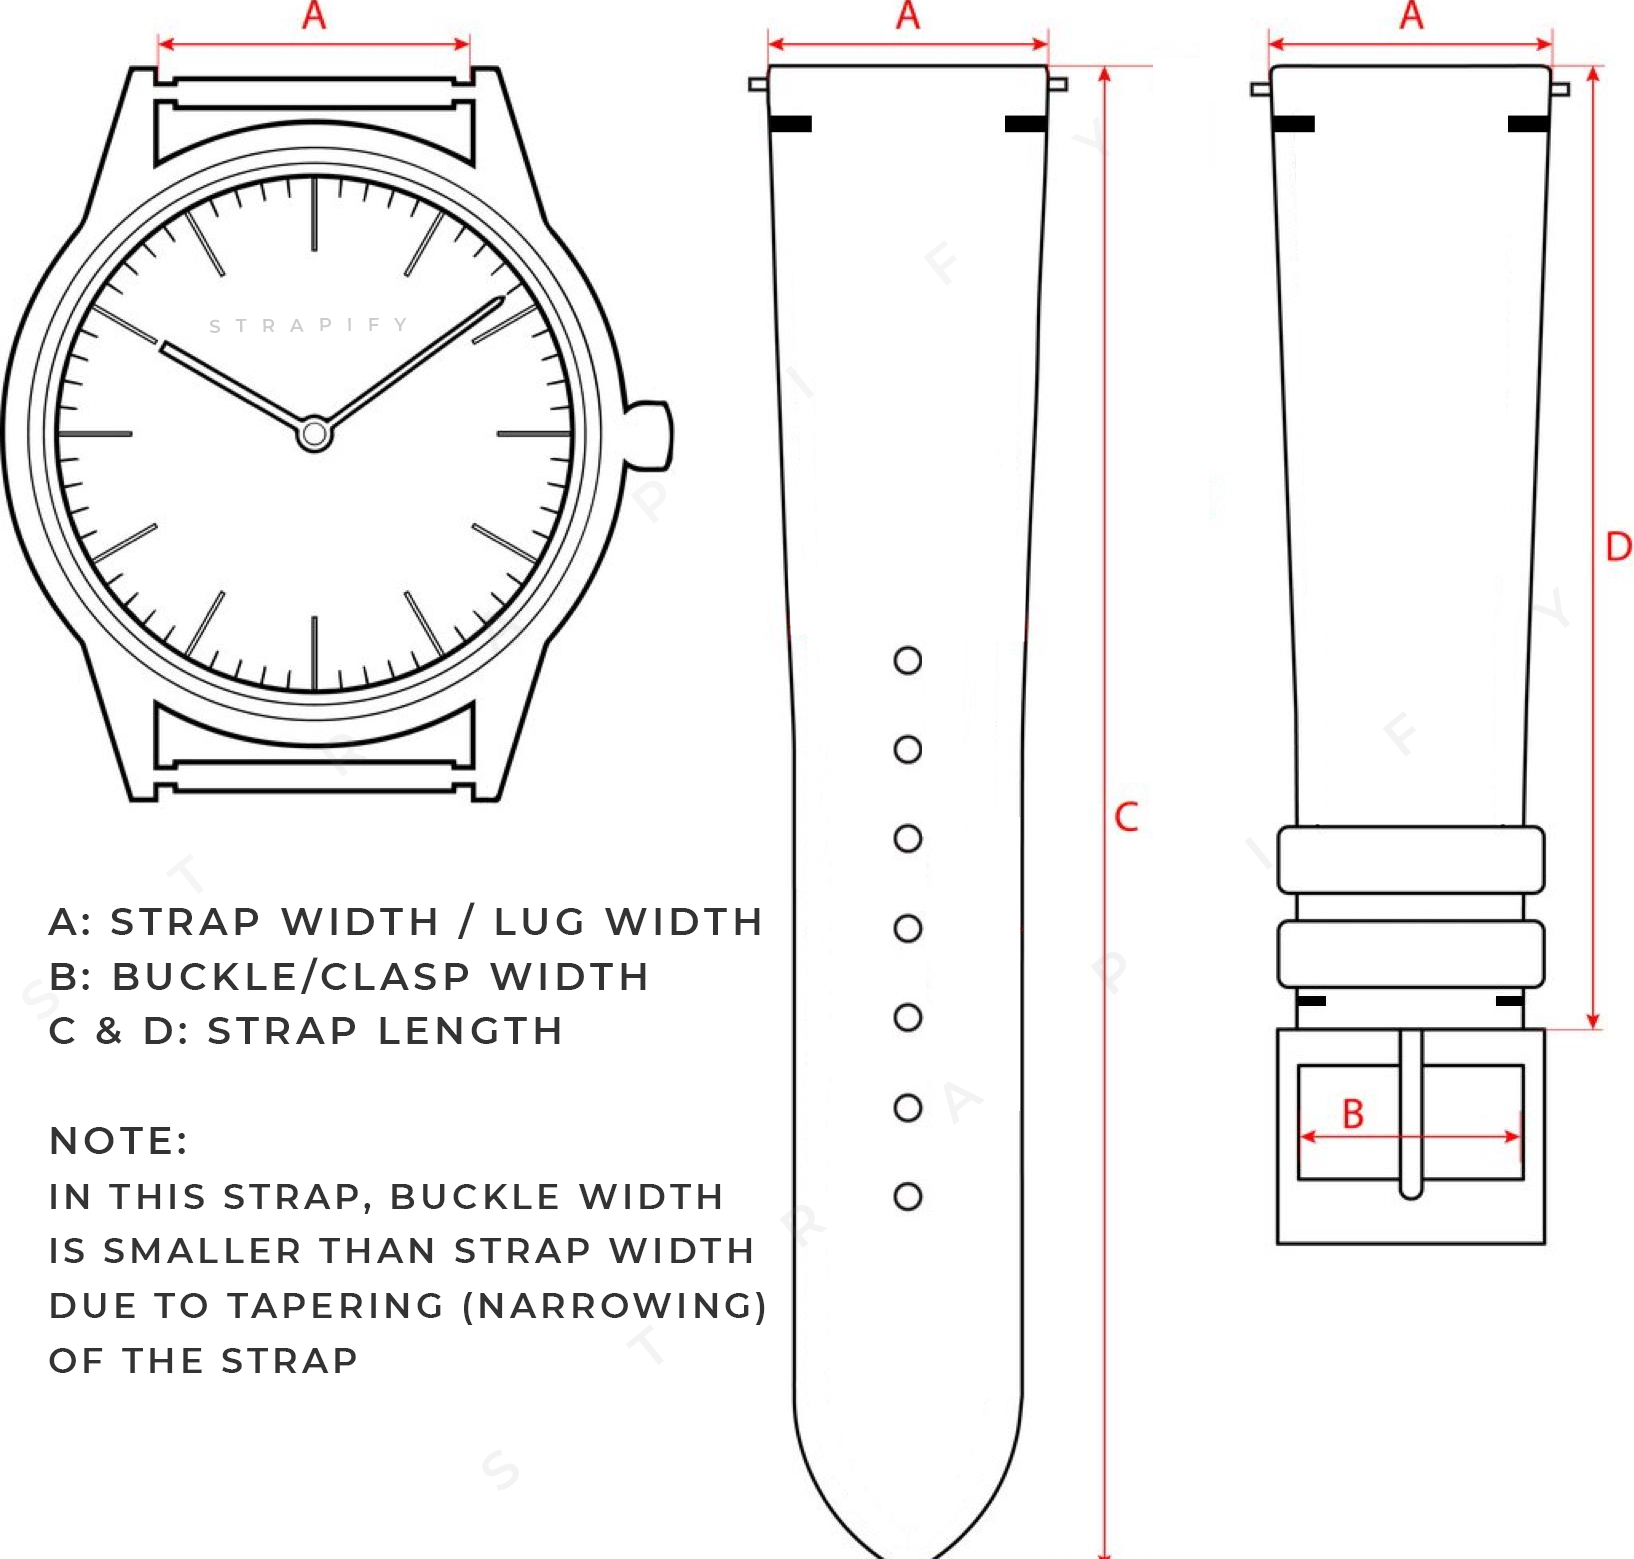 I understand 24mm is the width of the strap and not the length of the strap. The width is the part that connects to the watch.